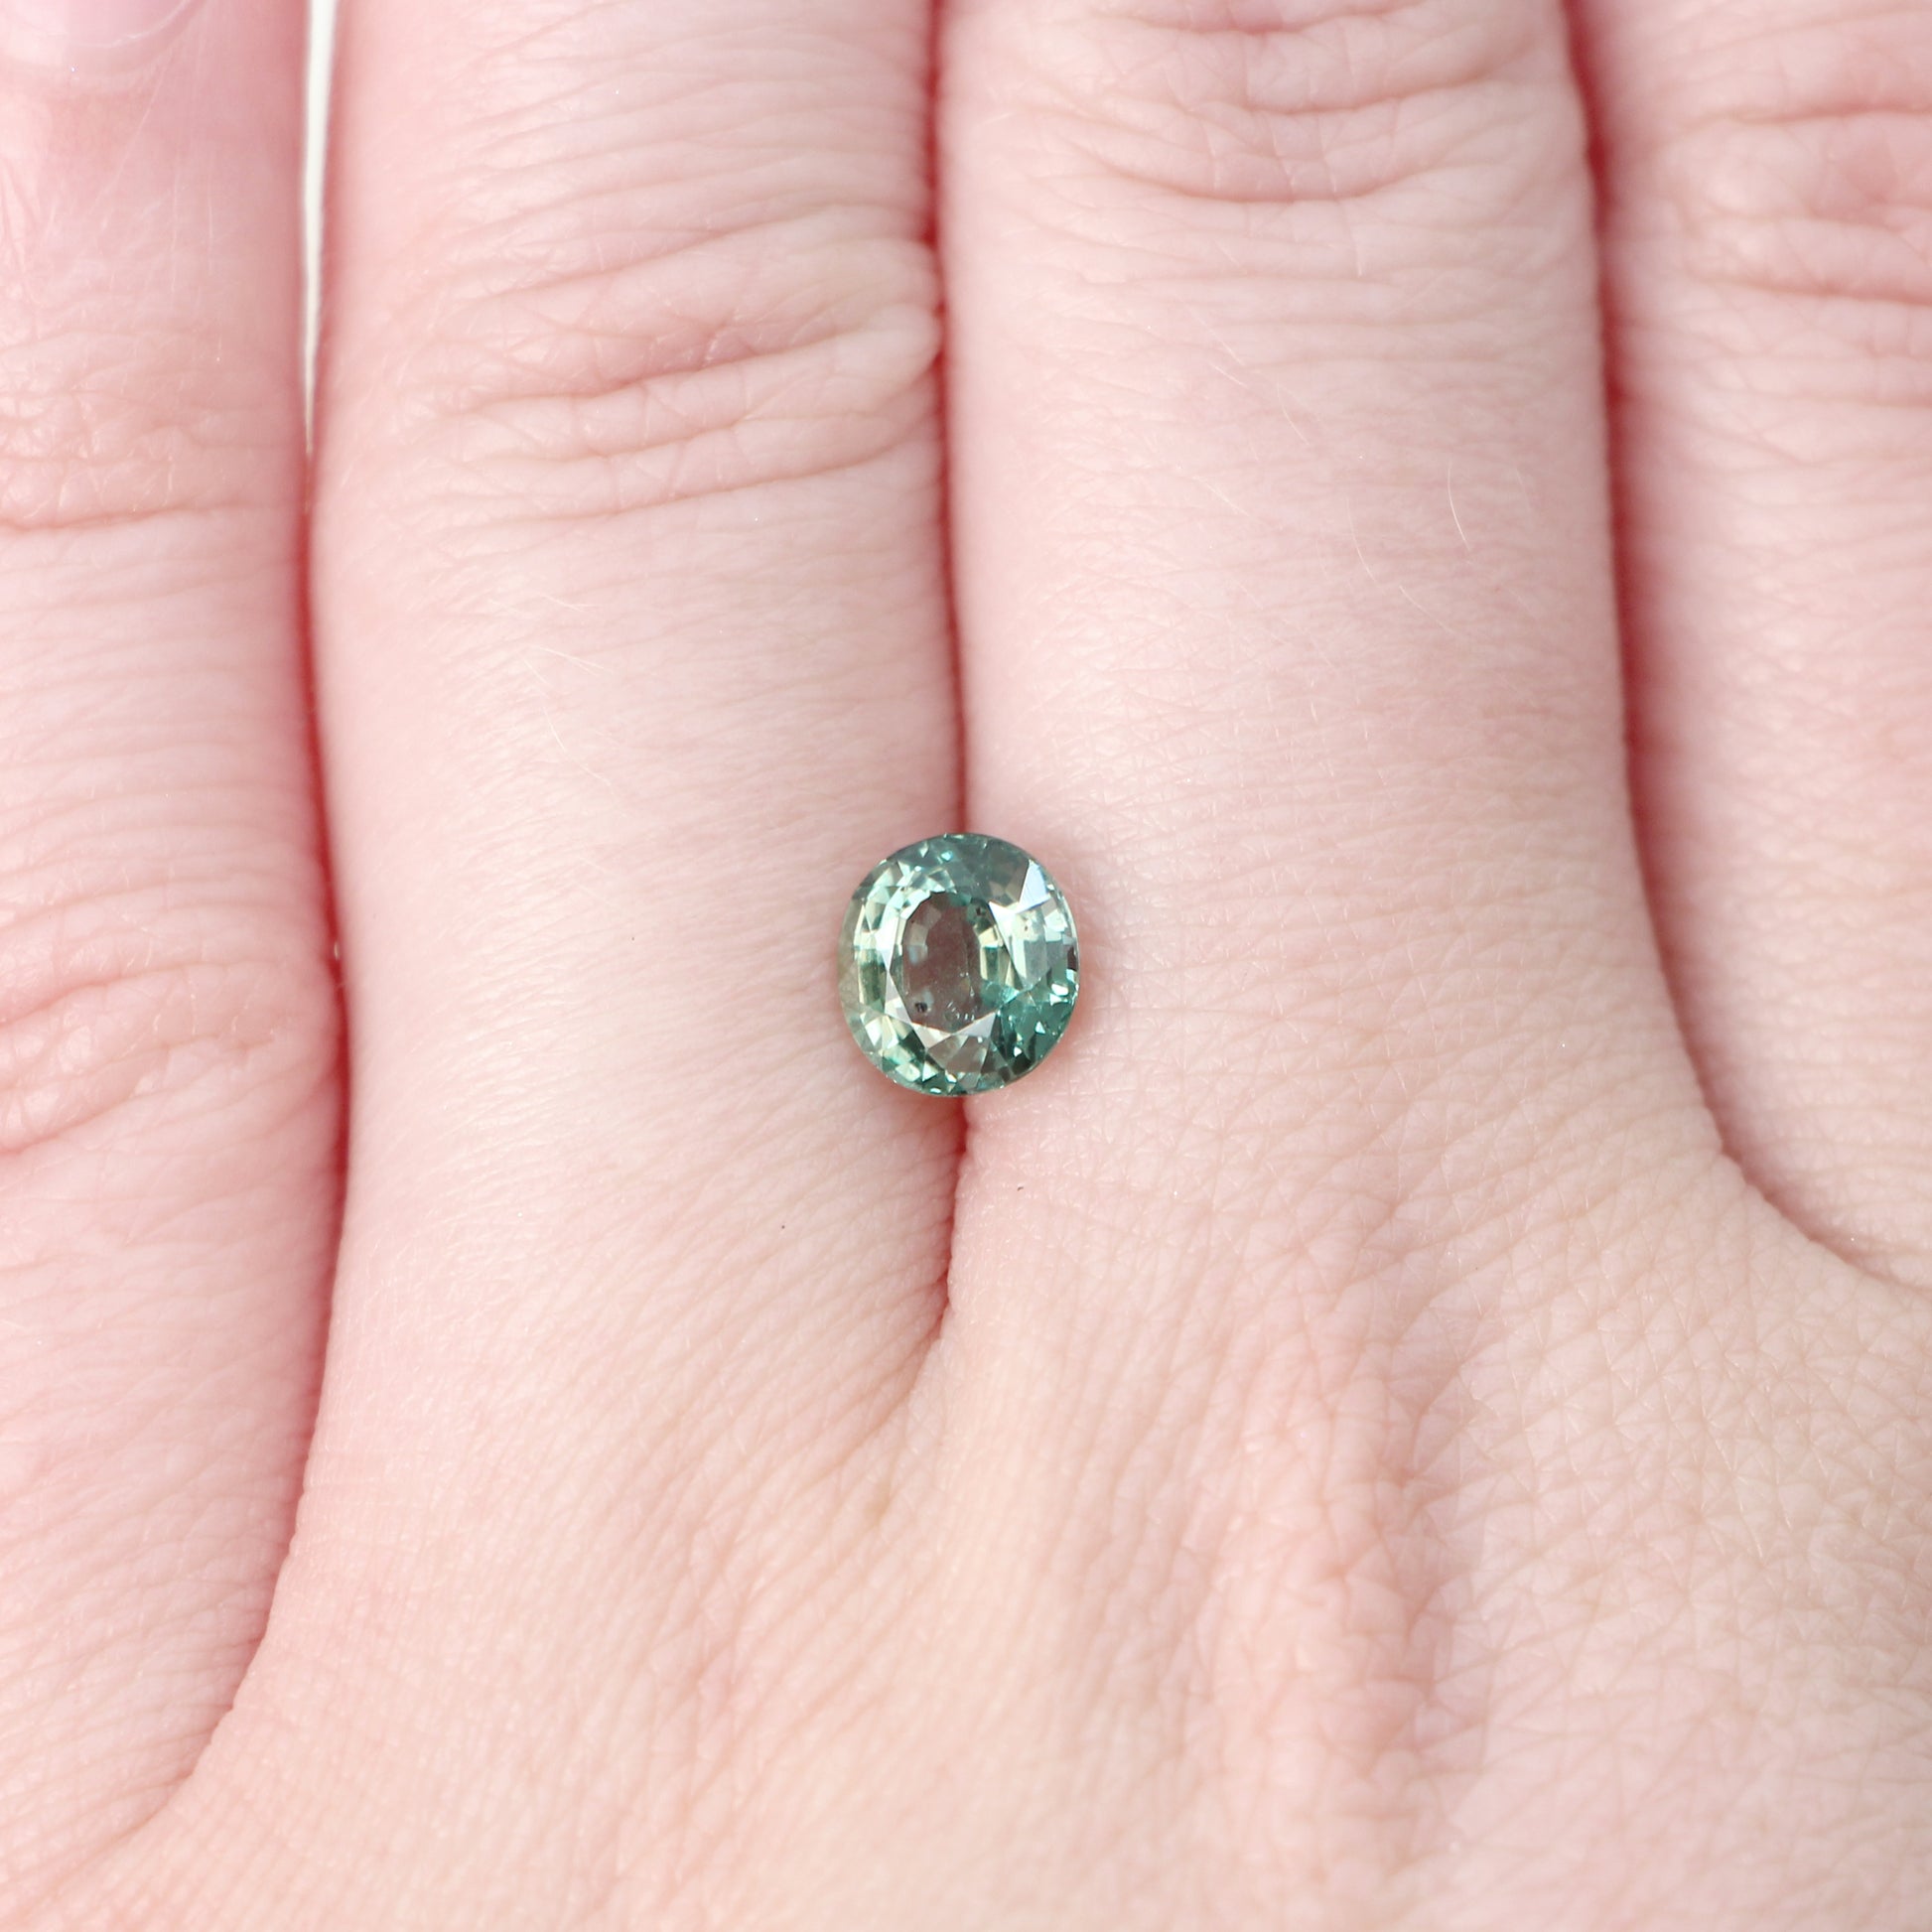 1.49 Carat Light Green Teal Sapphire for Custom Work - Inventory Code GTOS149 - Midwinter Co. Alternative Bridal Rings and Modern Fine Jewelry